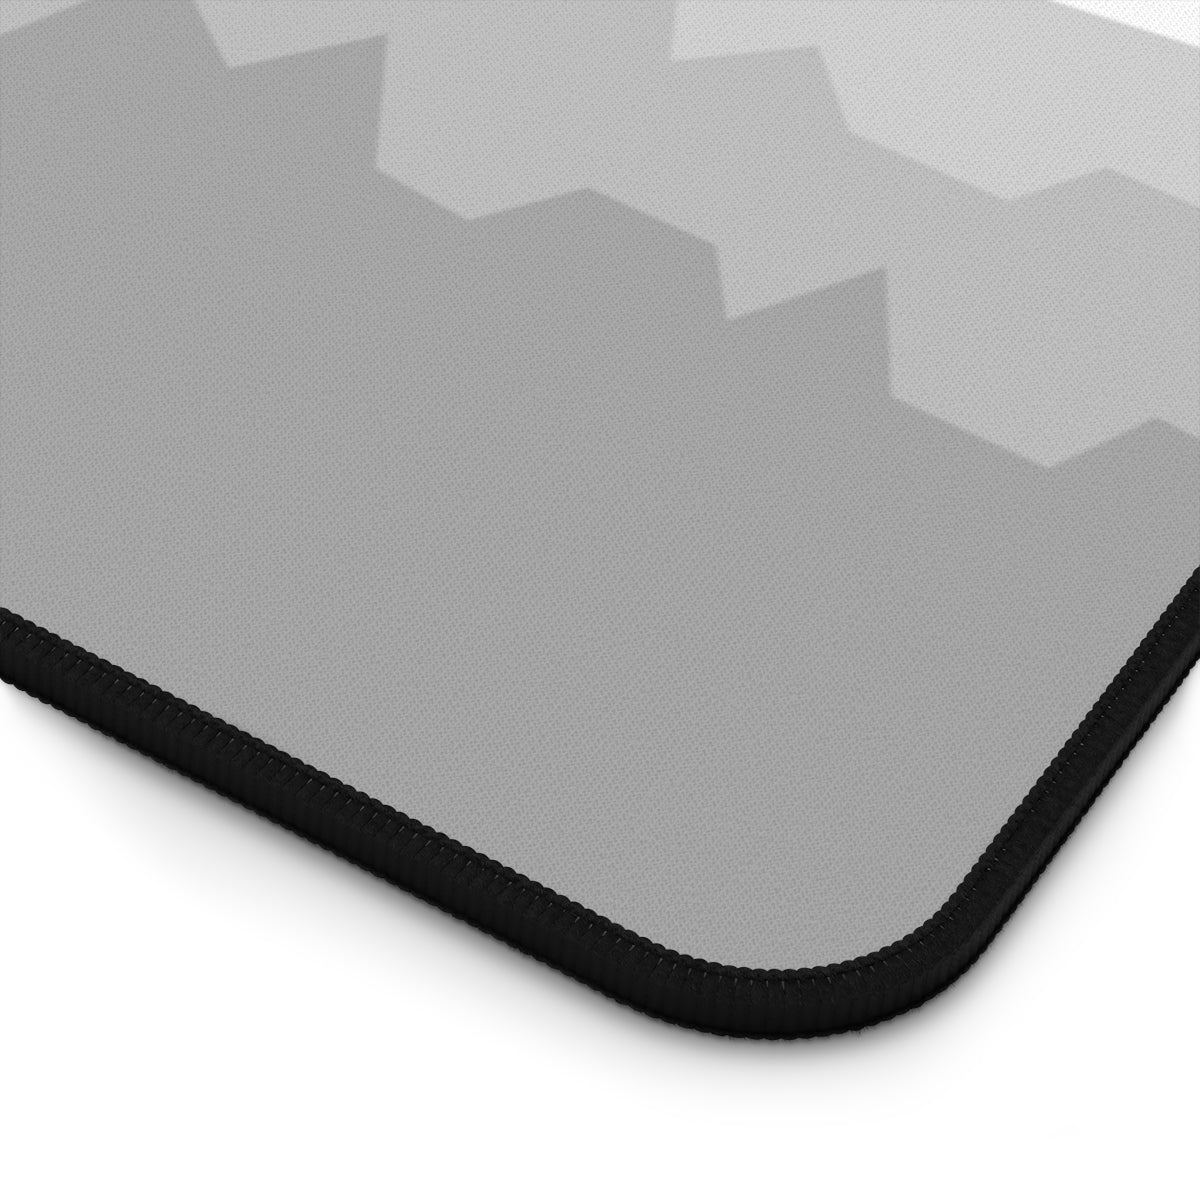 Gray & White Abstract Mountains Desk Mat - Desk Cookies